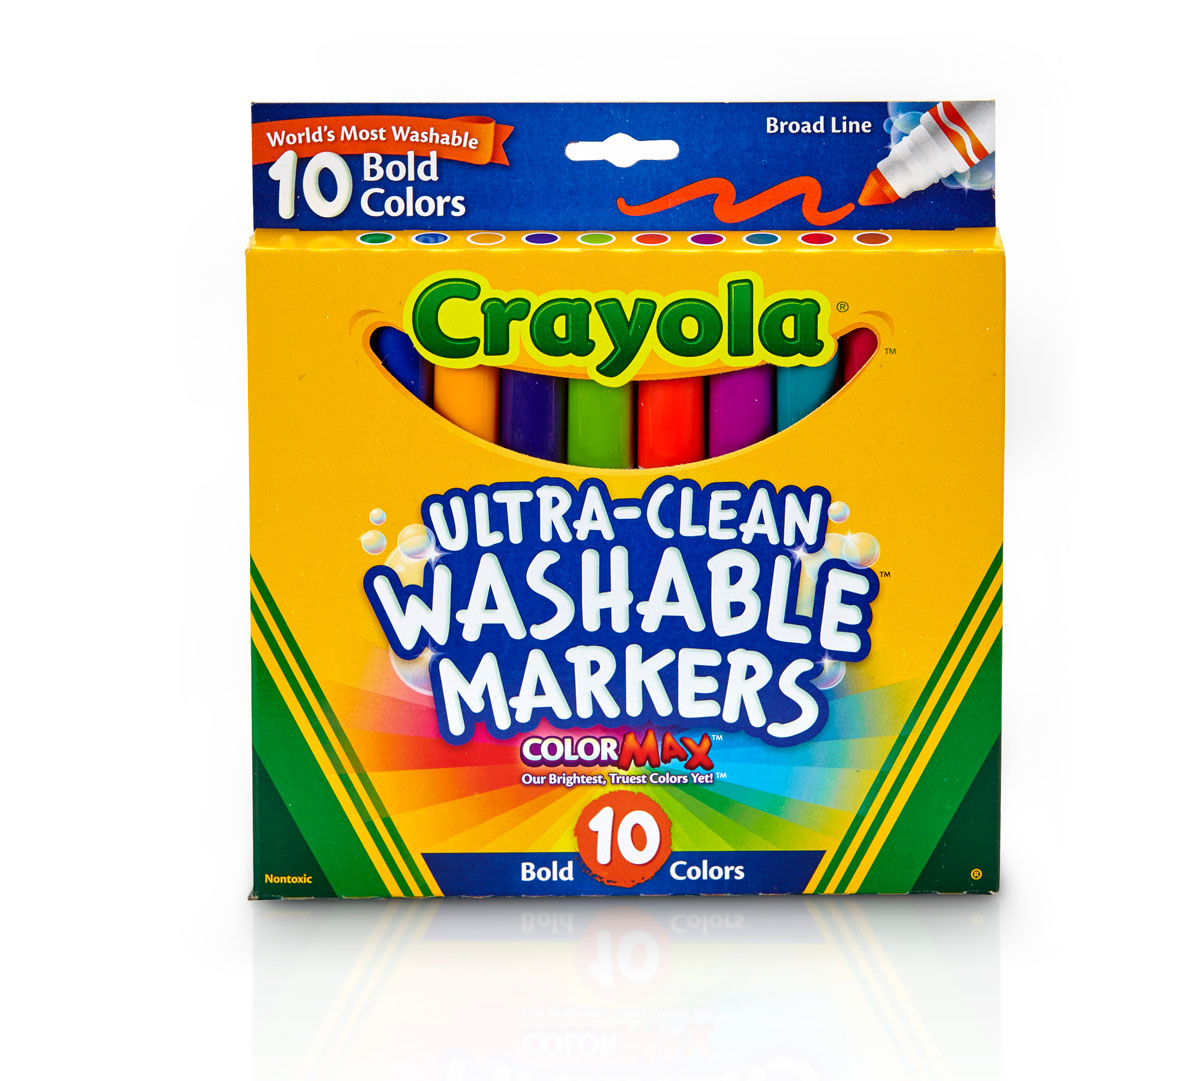 https://shop.crayola.com/on/demandware.static/-/Sites-crayola-storefront/default/dw1c13eedd/images/58-7853-0-201_Product_Core_Markers_Washable_Ultra-Clean_Bold-Colors_BL_10ct_F1.jpg